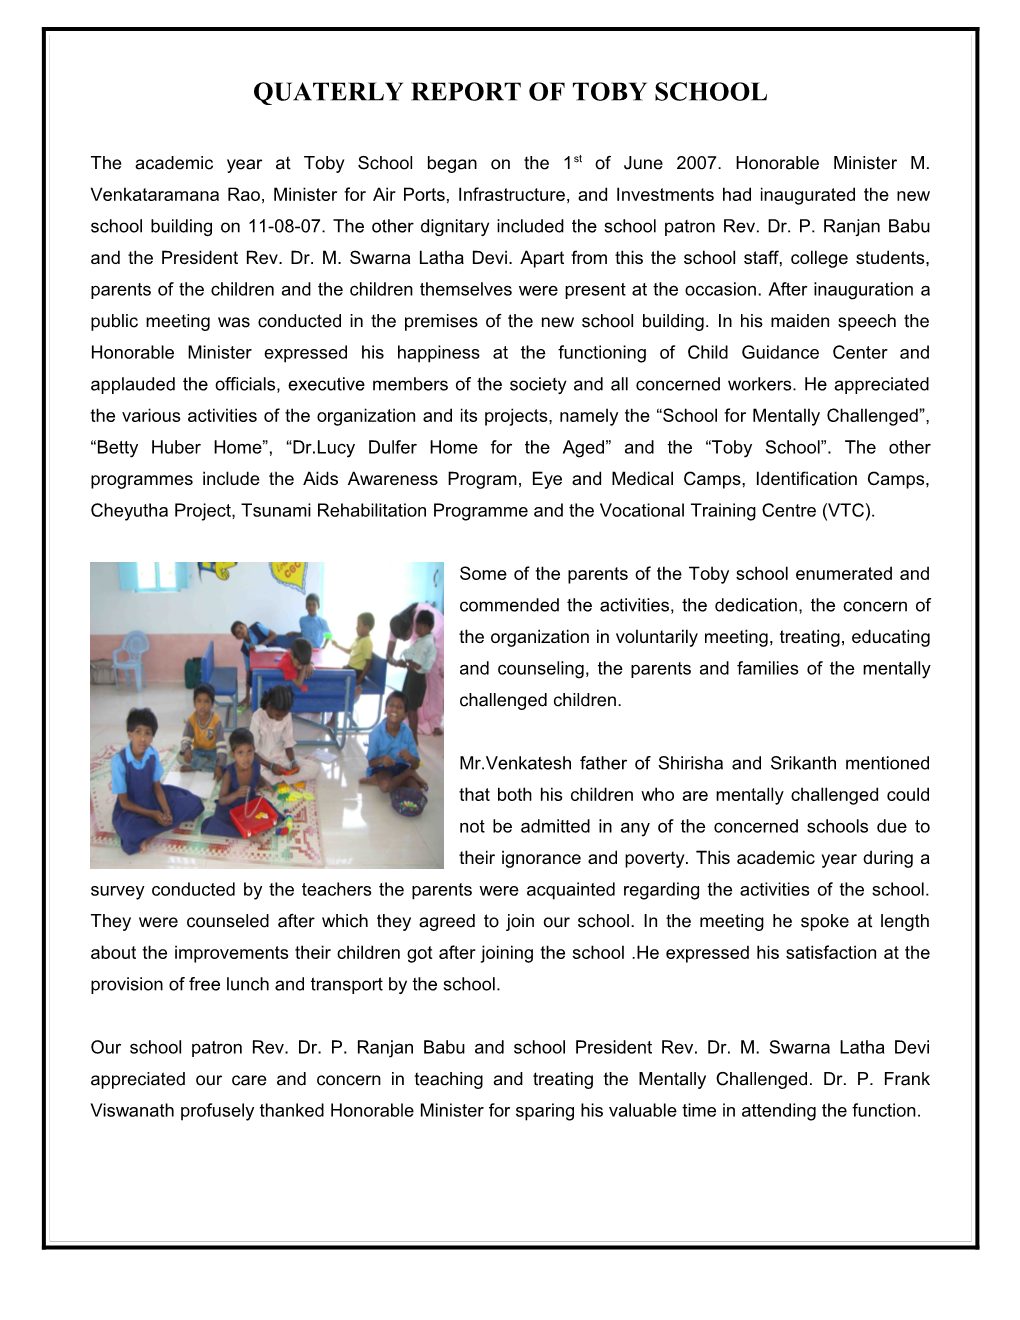 Annual Report of Toby School